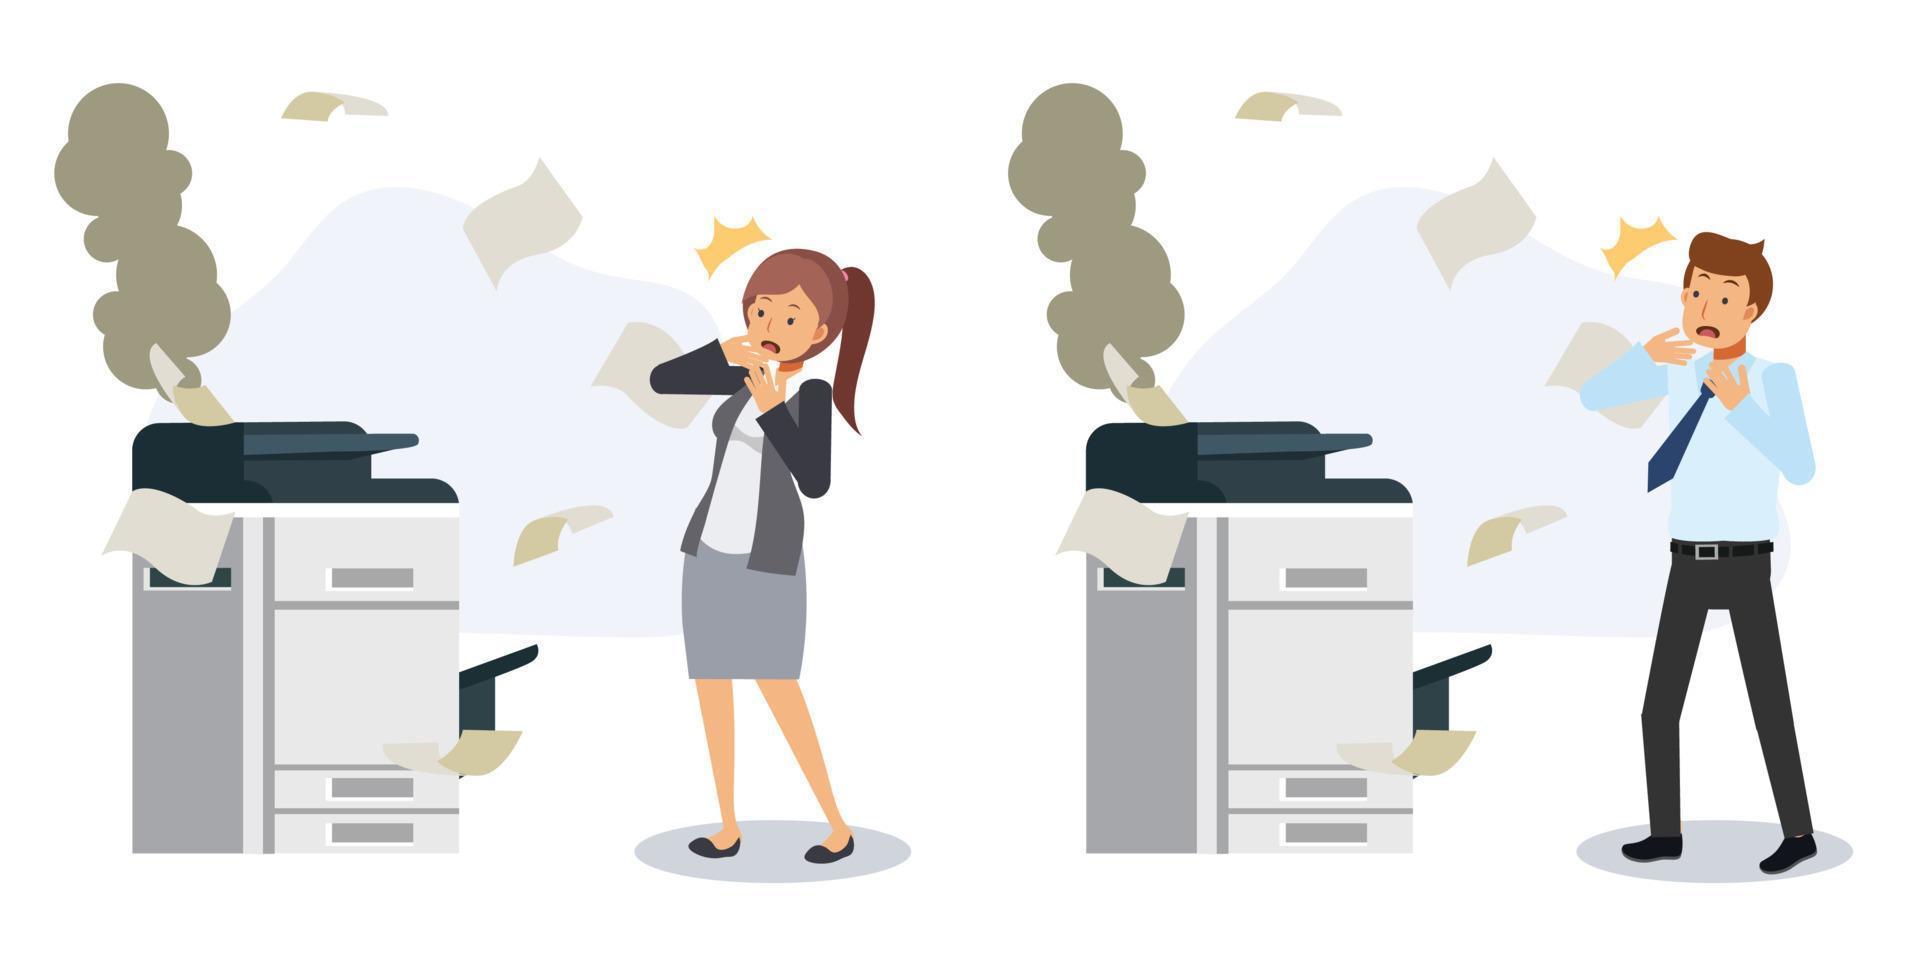 Business people in office concept. Problem at office, broken printer, messy,office equipment.Flat vector 2D cartoon character illustration.